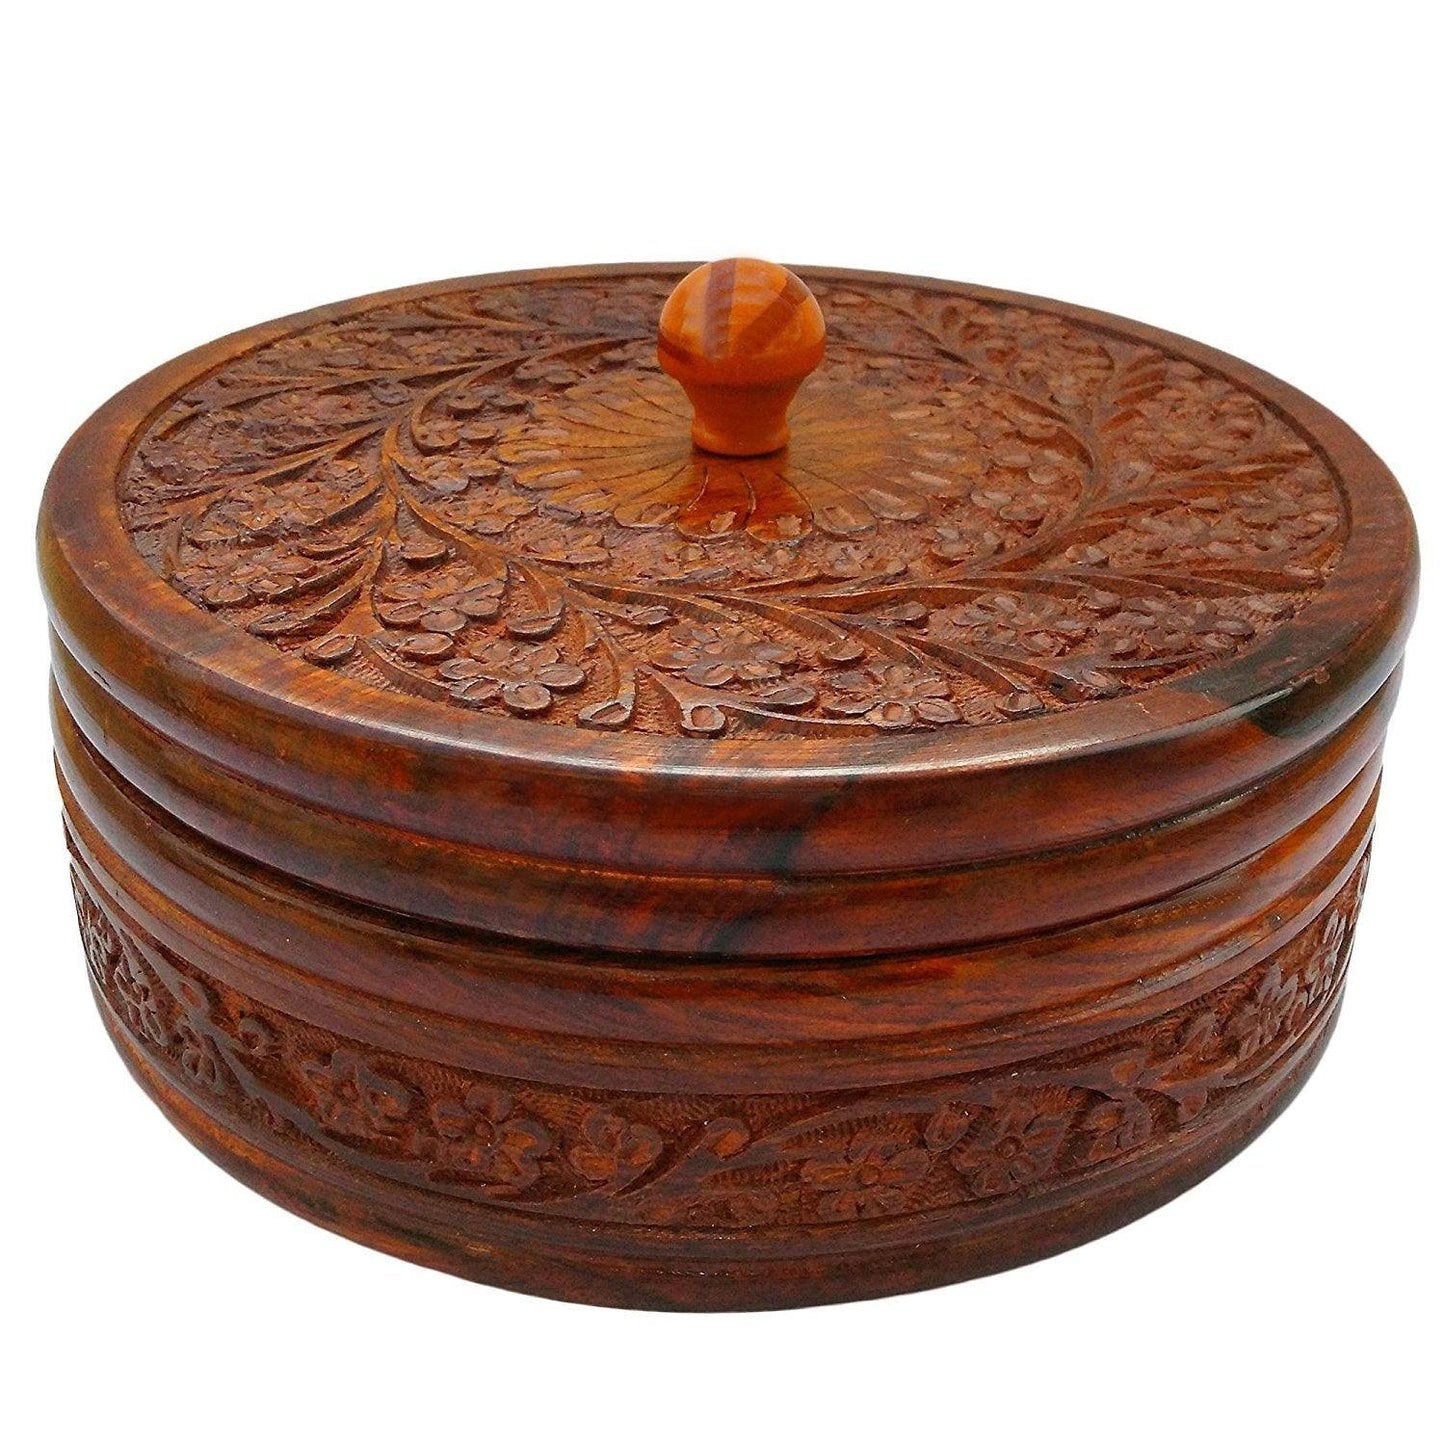 Antique handmade Carving Wooden Box Pot Serving Bowl with Lid for Chapatis (Brown, 8-inch) - GreentouchCrafts